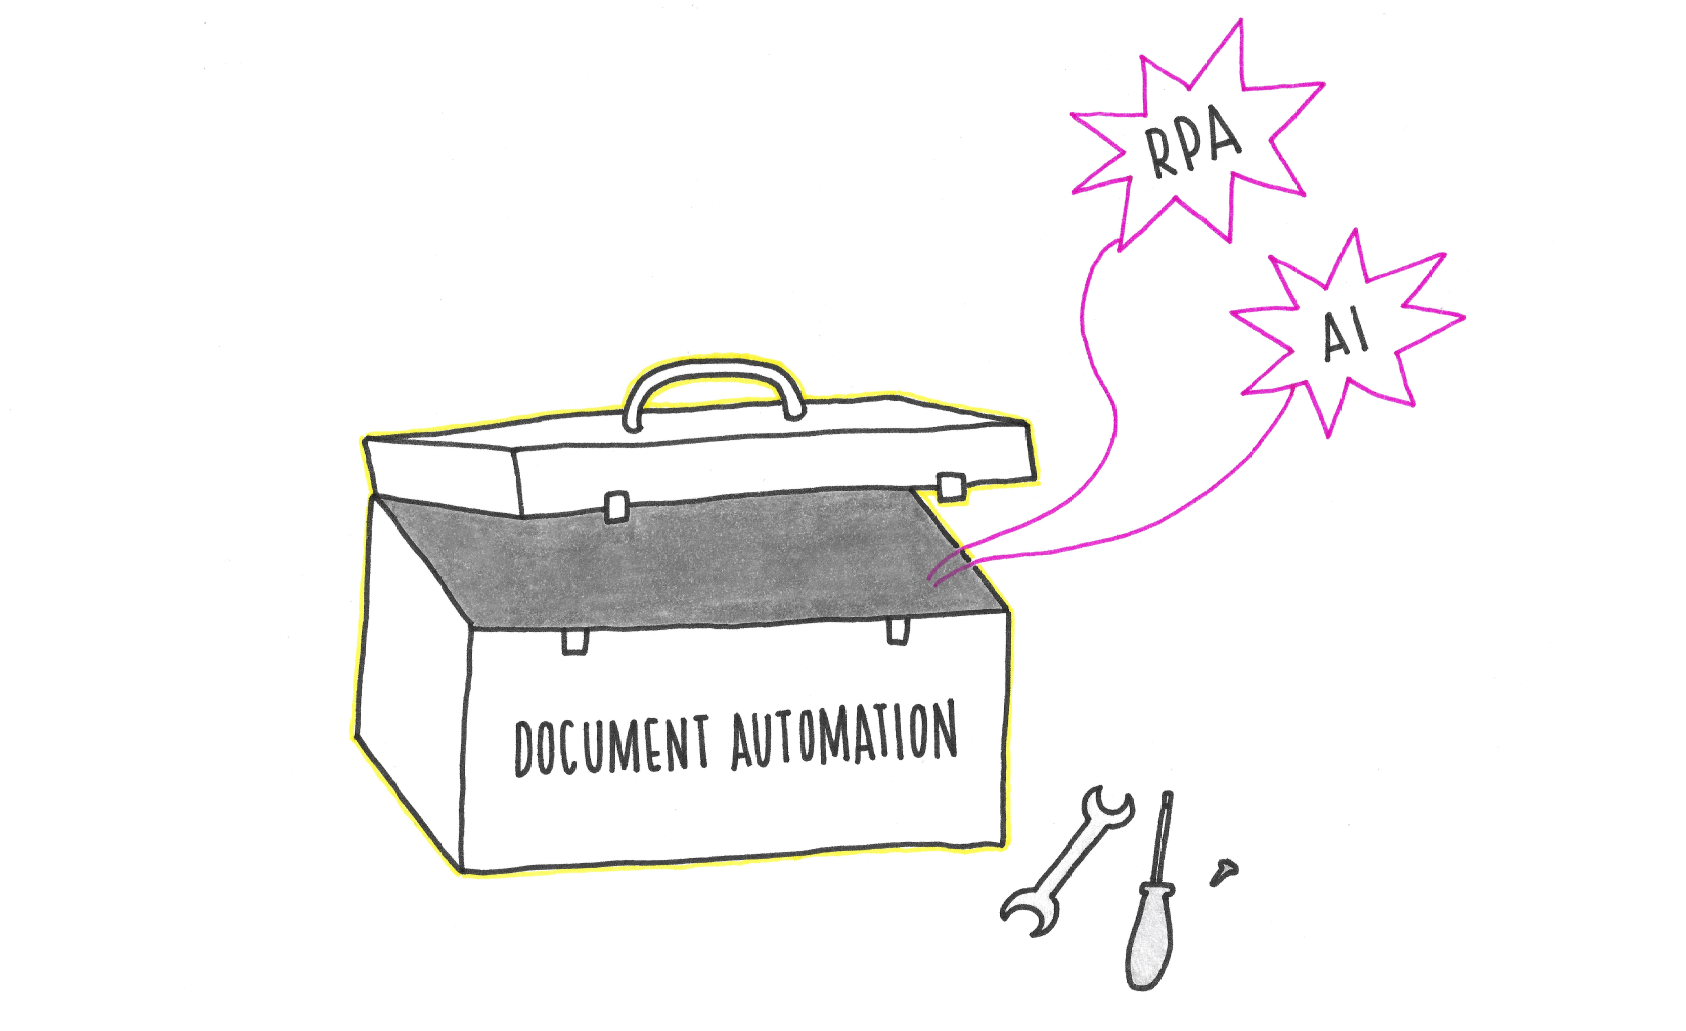 Hand drawn image of a toolbox with the label DOCUMENT AUTOMATION, with AI and RPA floating out of it.